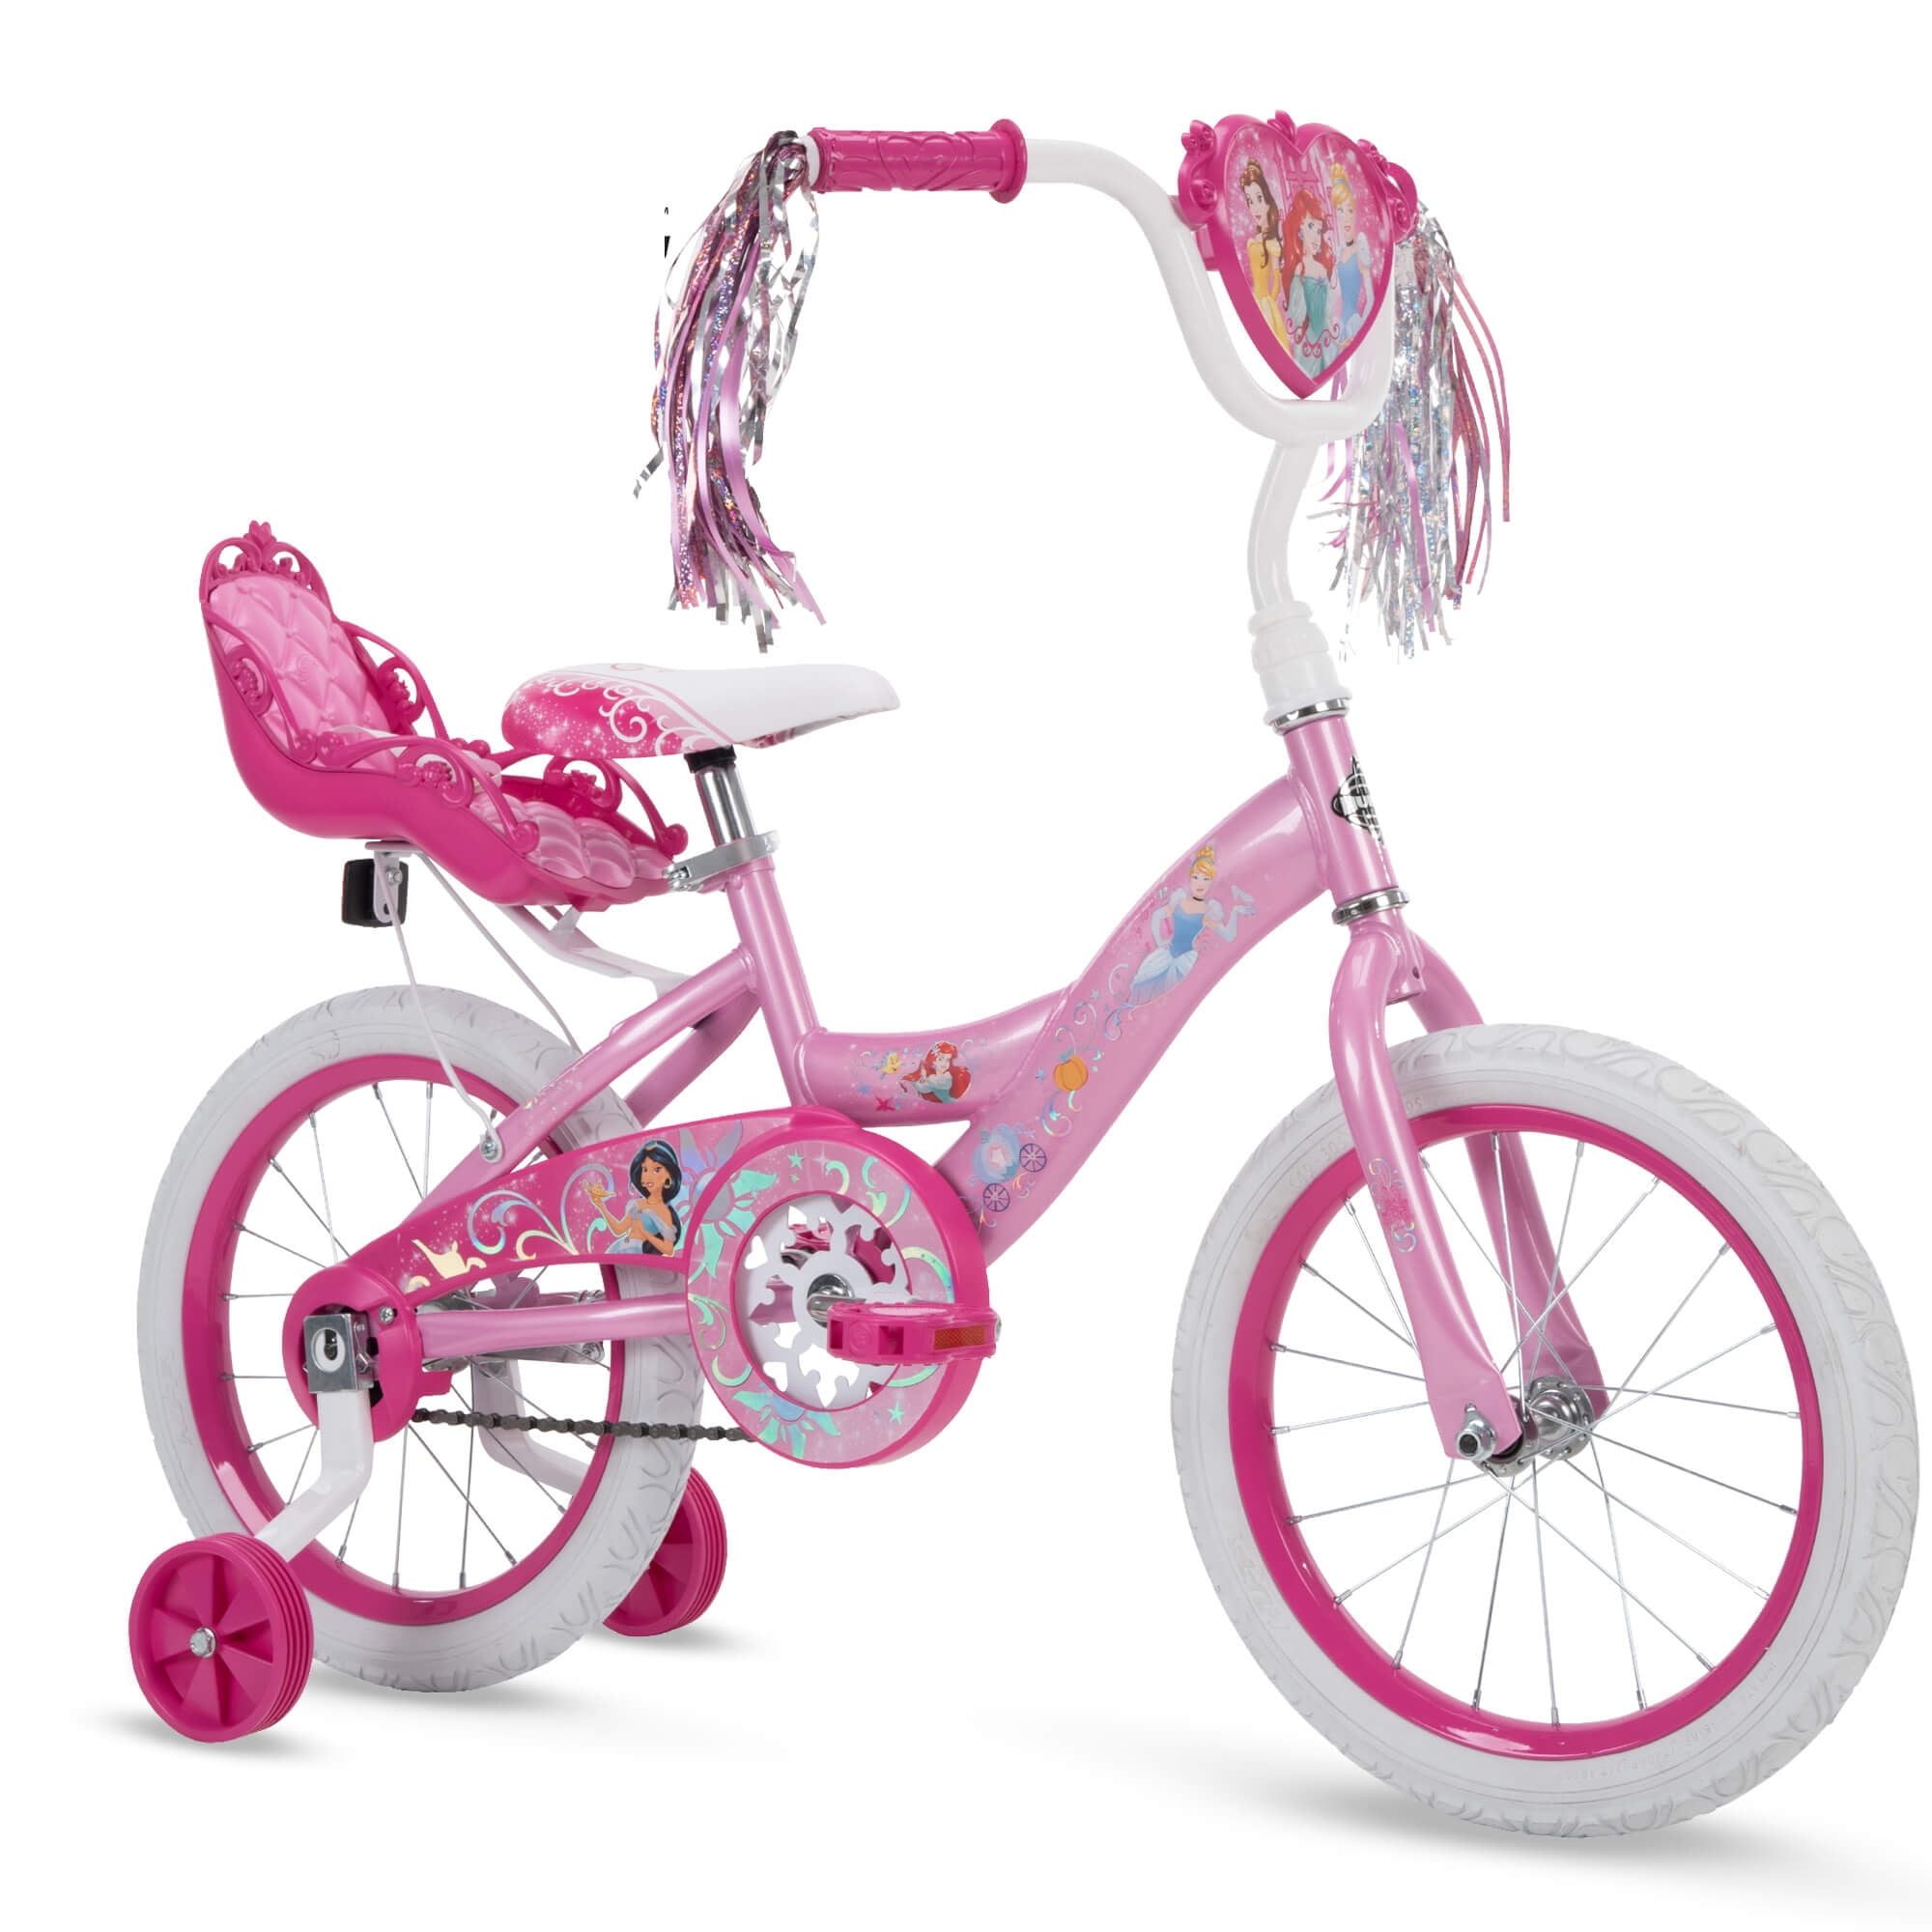 Diisney Frozen 12" Girls Bike with Doll Carrier by Huffy 